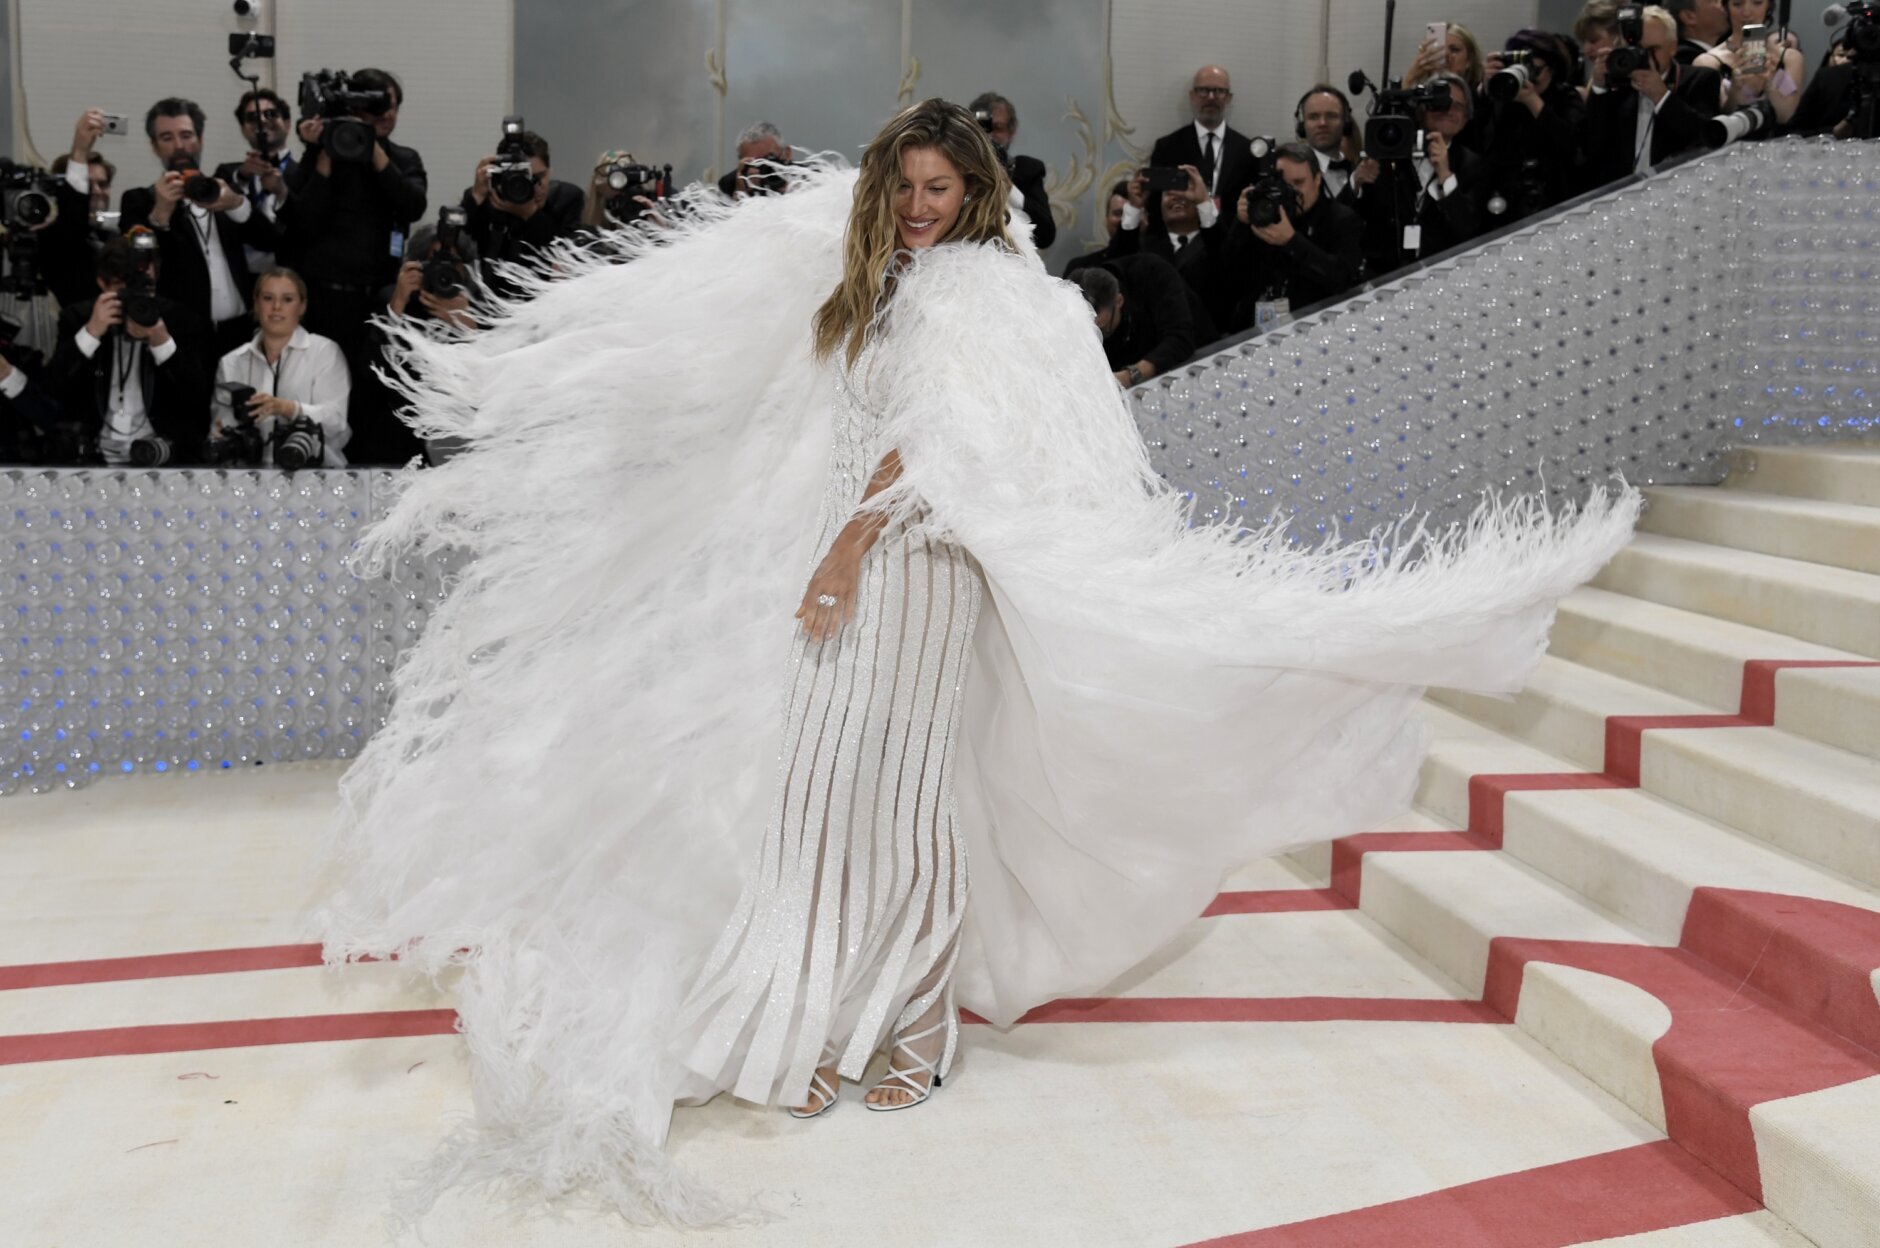 Met Gala: Stars Who Hated Their Experiences (and Why)